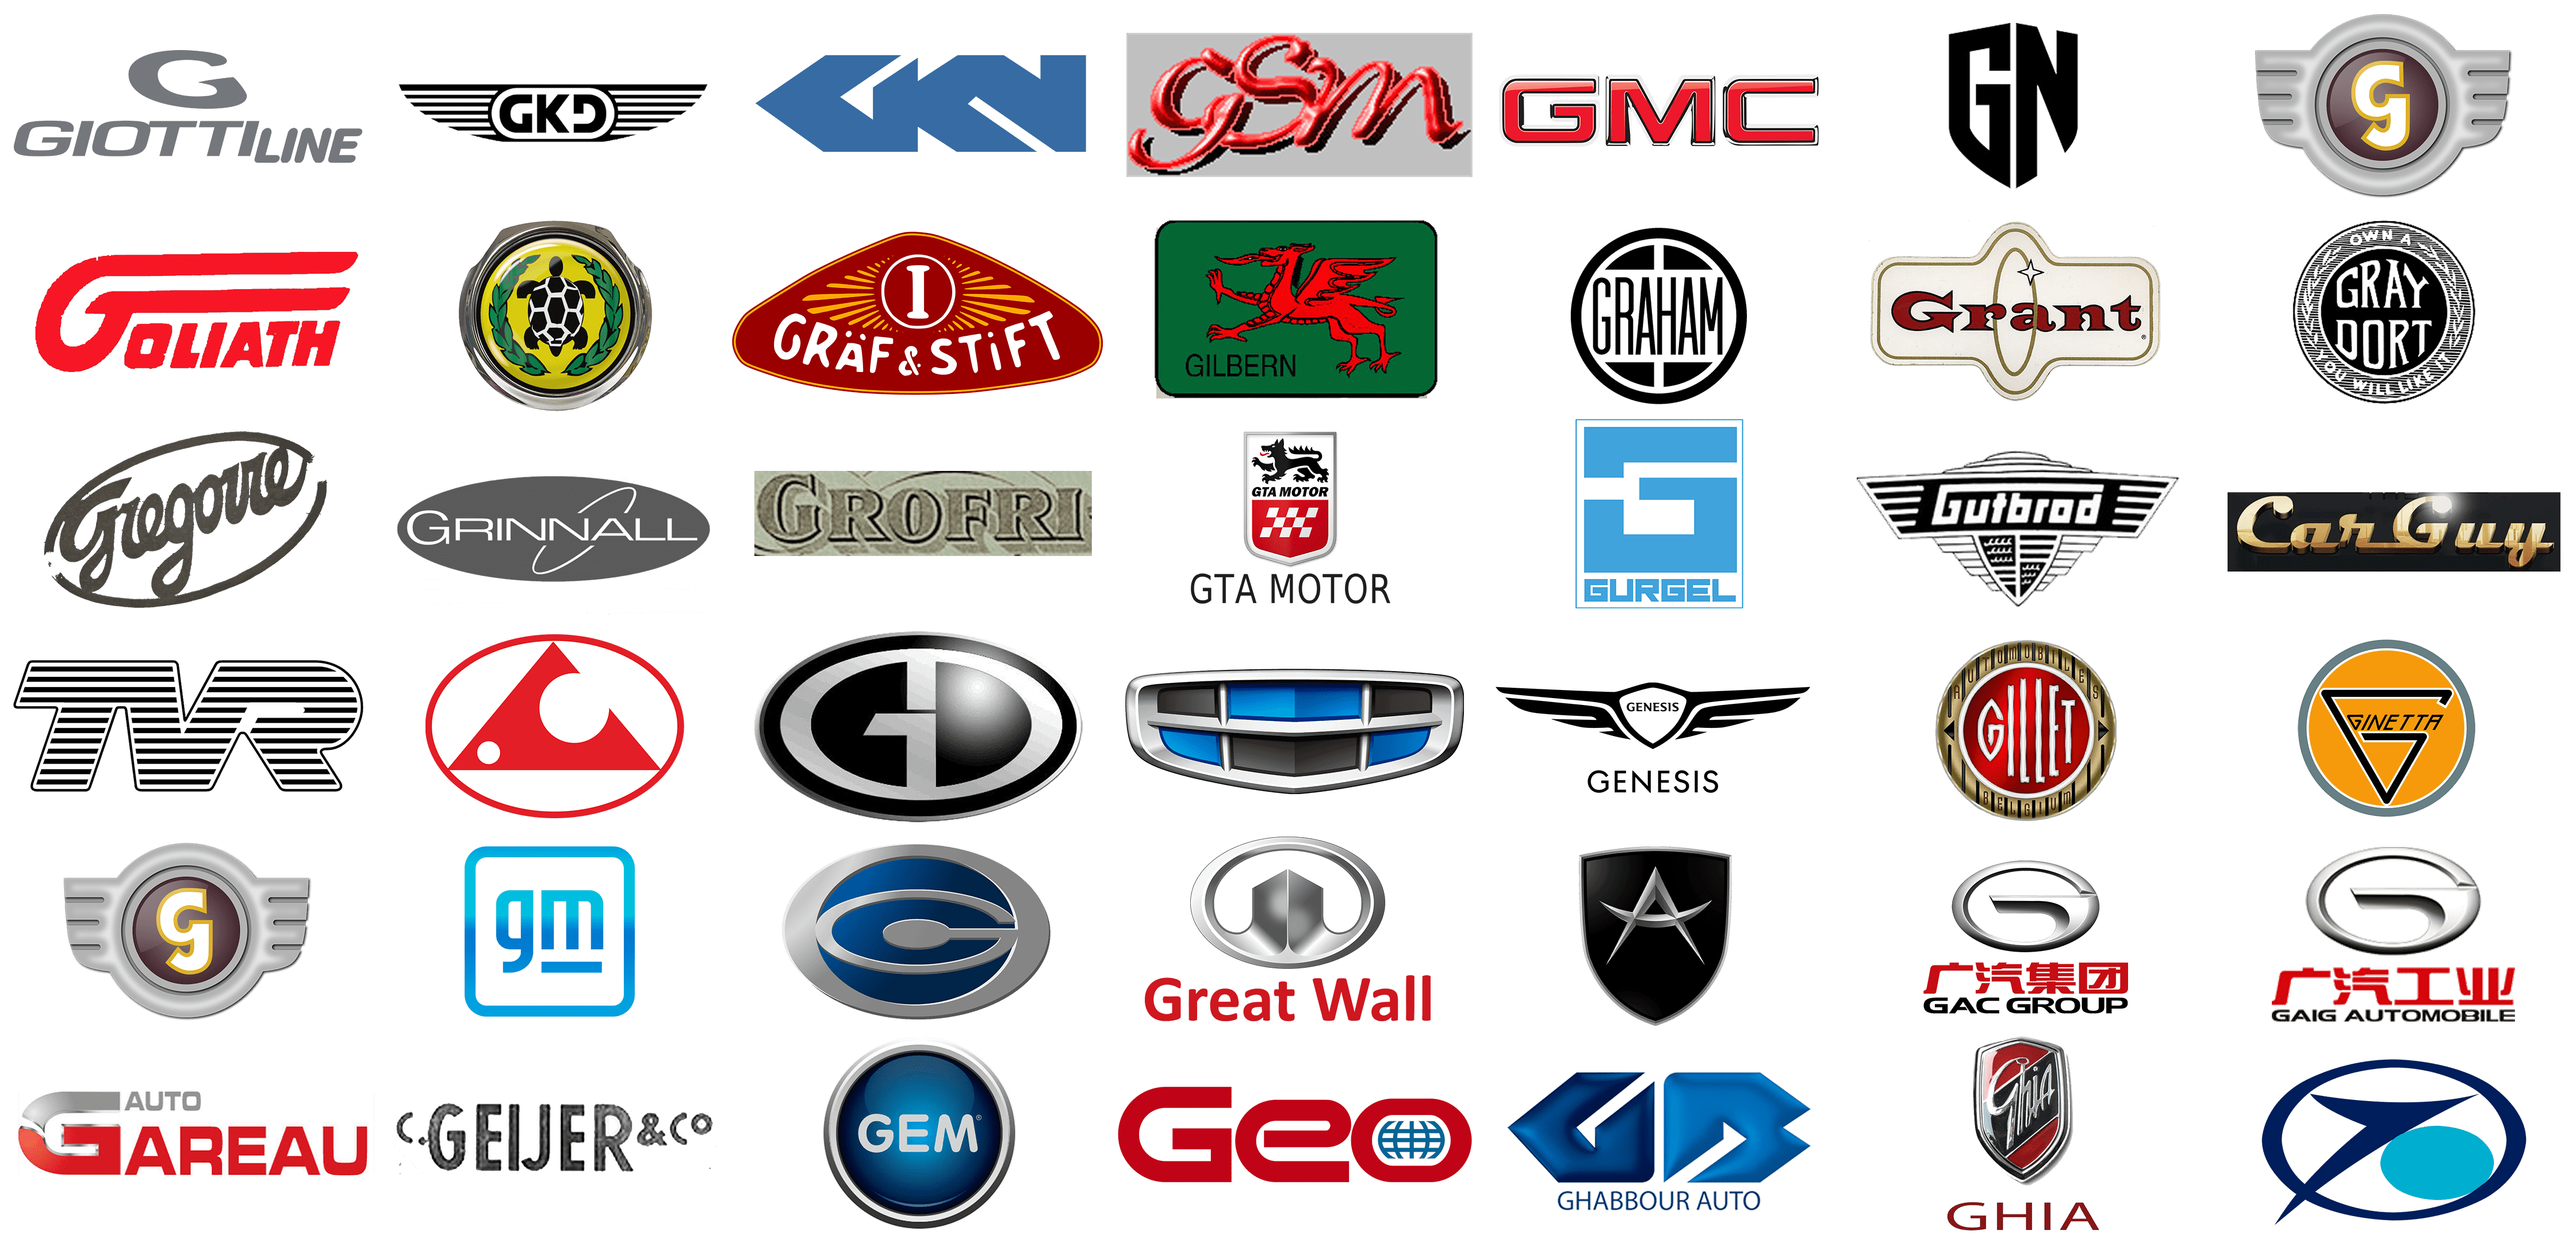 Car brands and logos that start with G